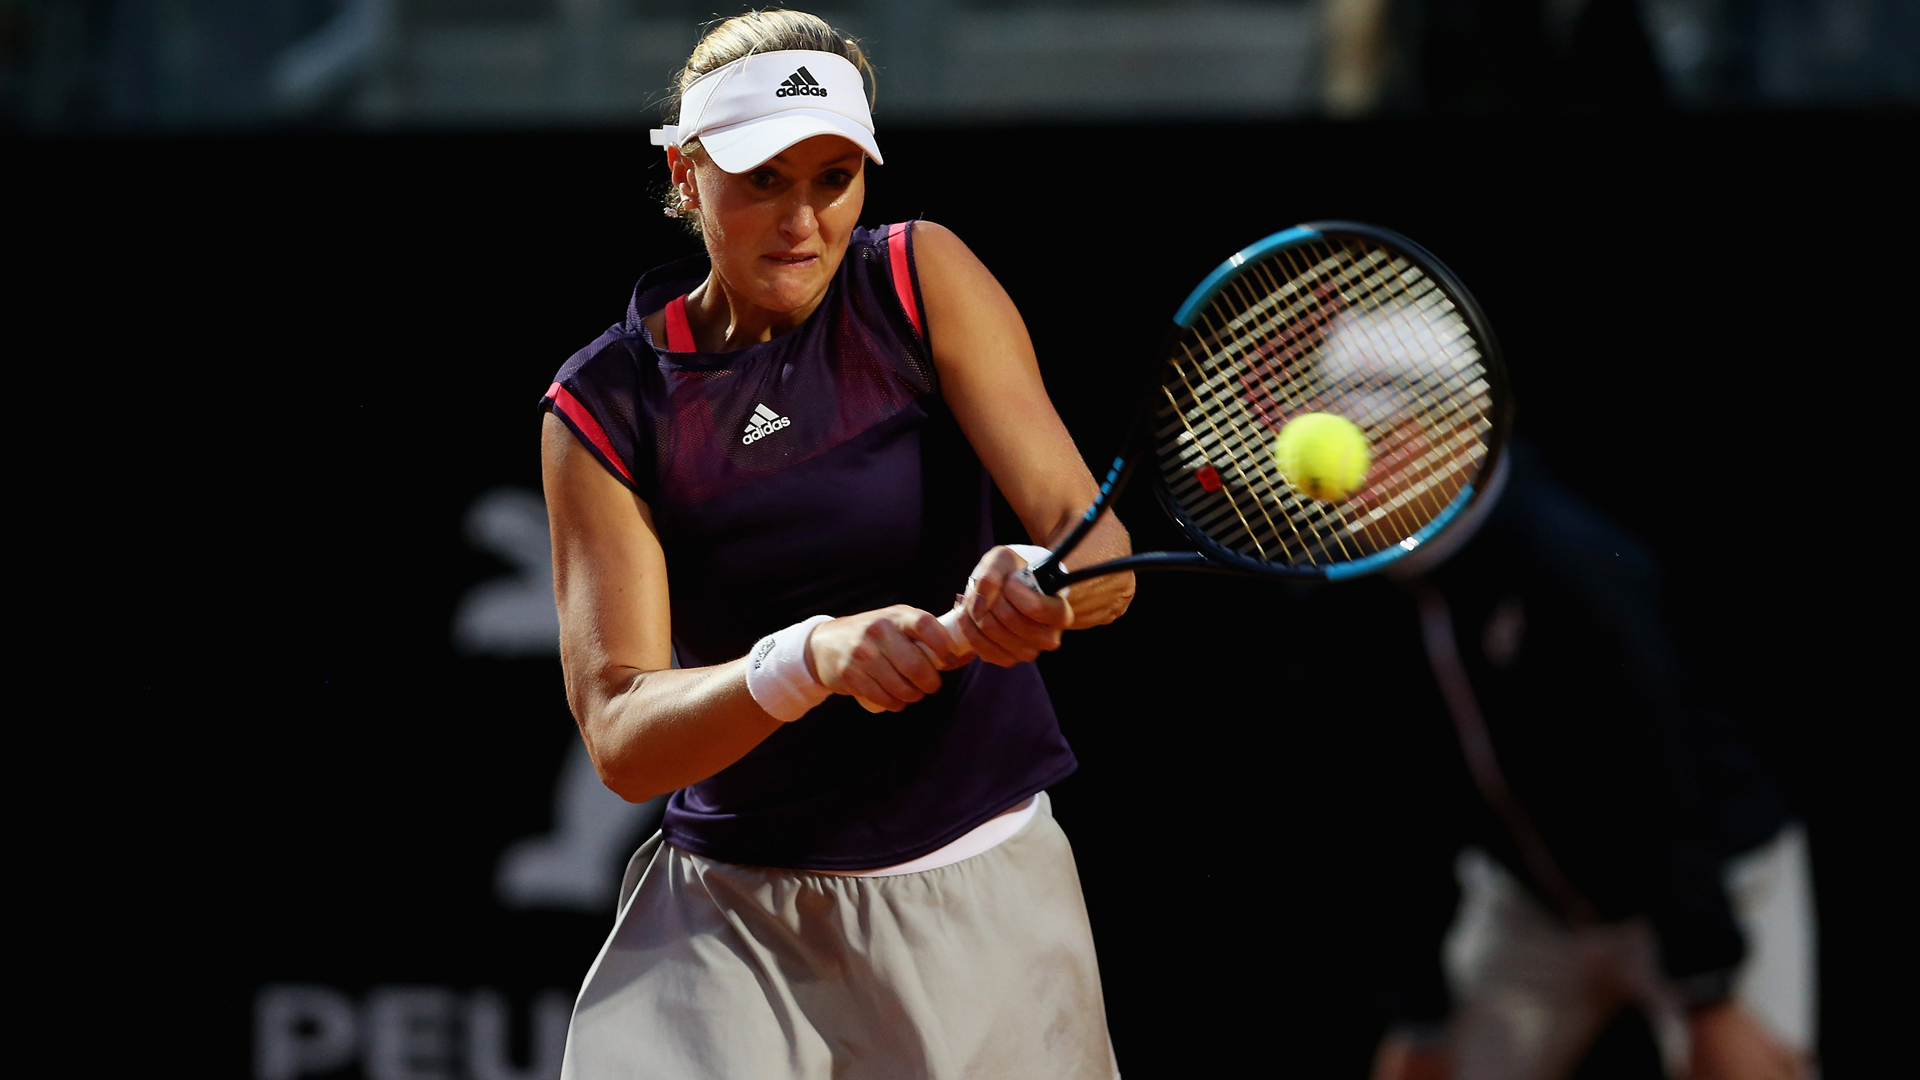 Kristina Mladenovic and Donna Vekic were among the winners in the first round of the Nottingham Open.